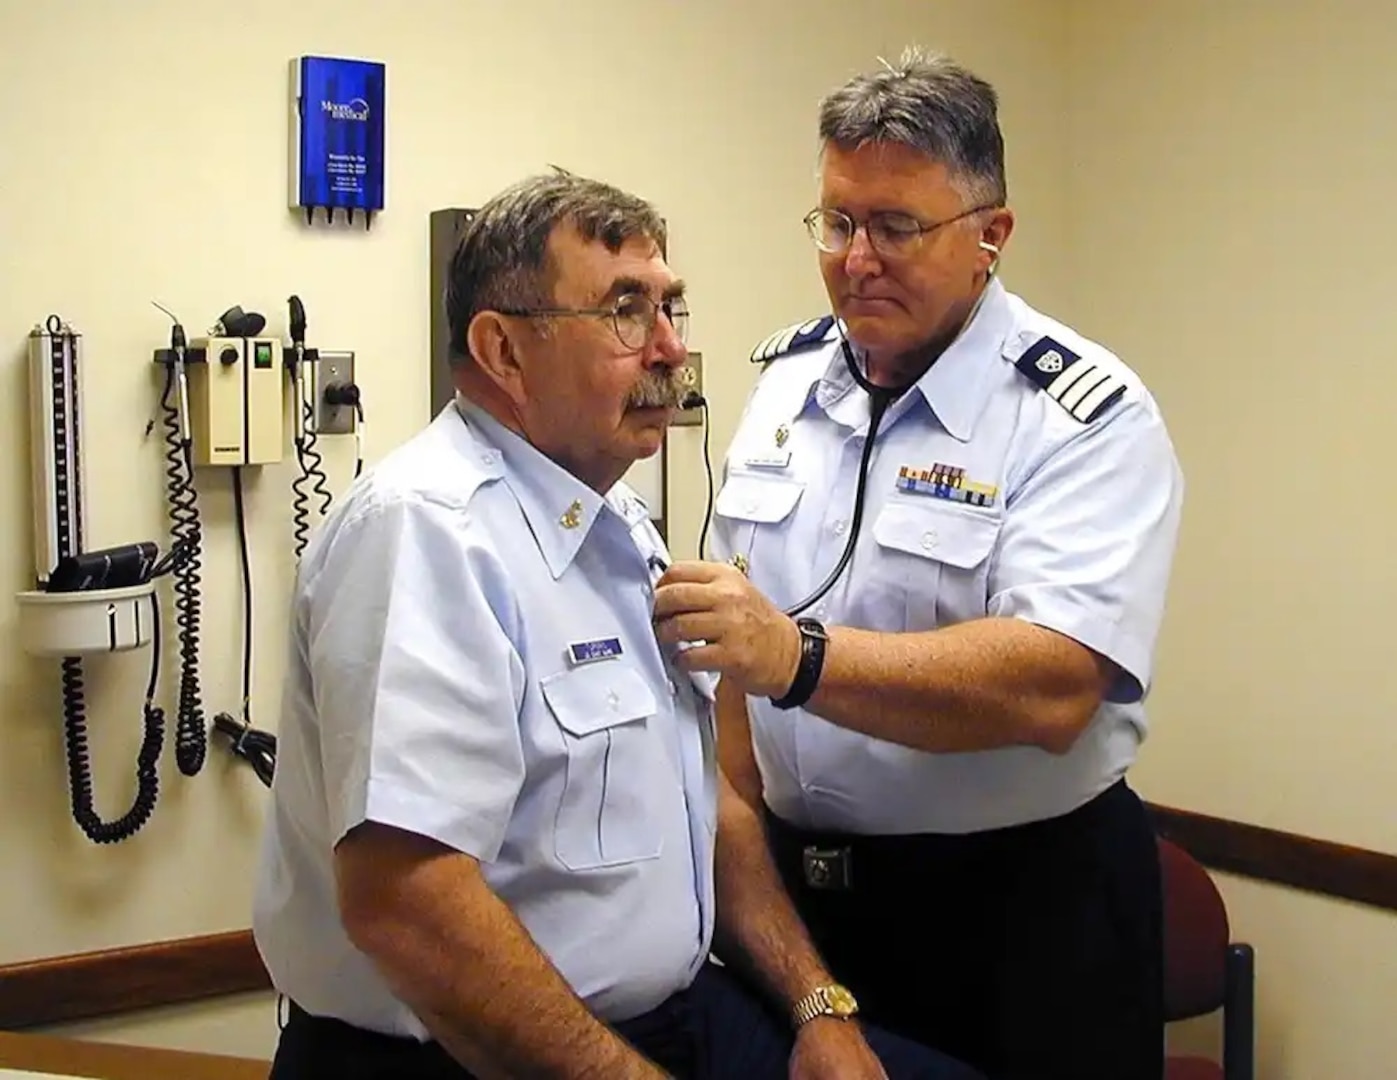 Dr. Victor Connell, a doctor at Coast Guard Training Center Petaluma, gives a medical exam to an active duty Coast Guardsman. Dr. Connell is one of over 100 auxiliarist, medical professionals who volunteer their time and skills to assist the U.S. Coast Guard. USCG photo.